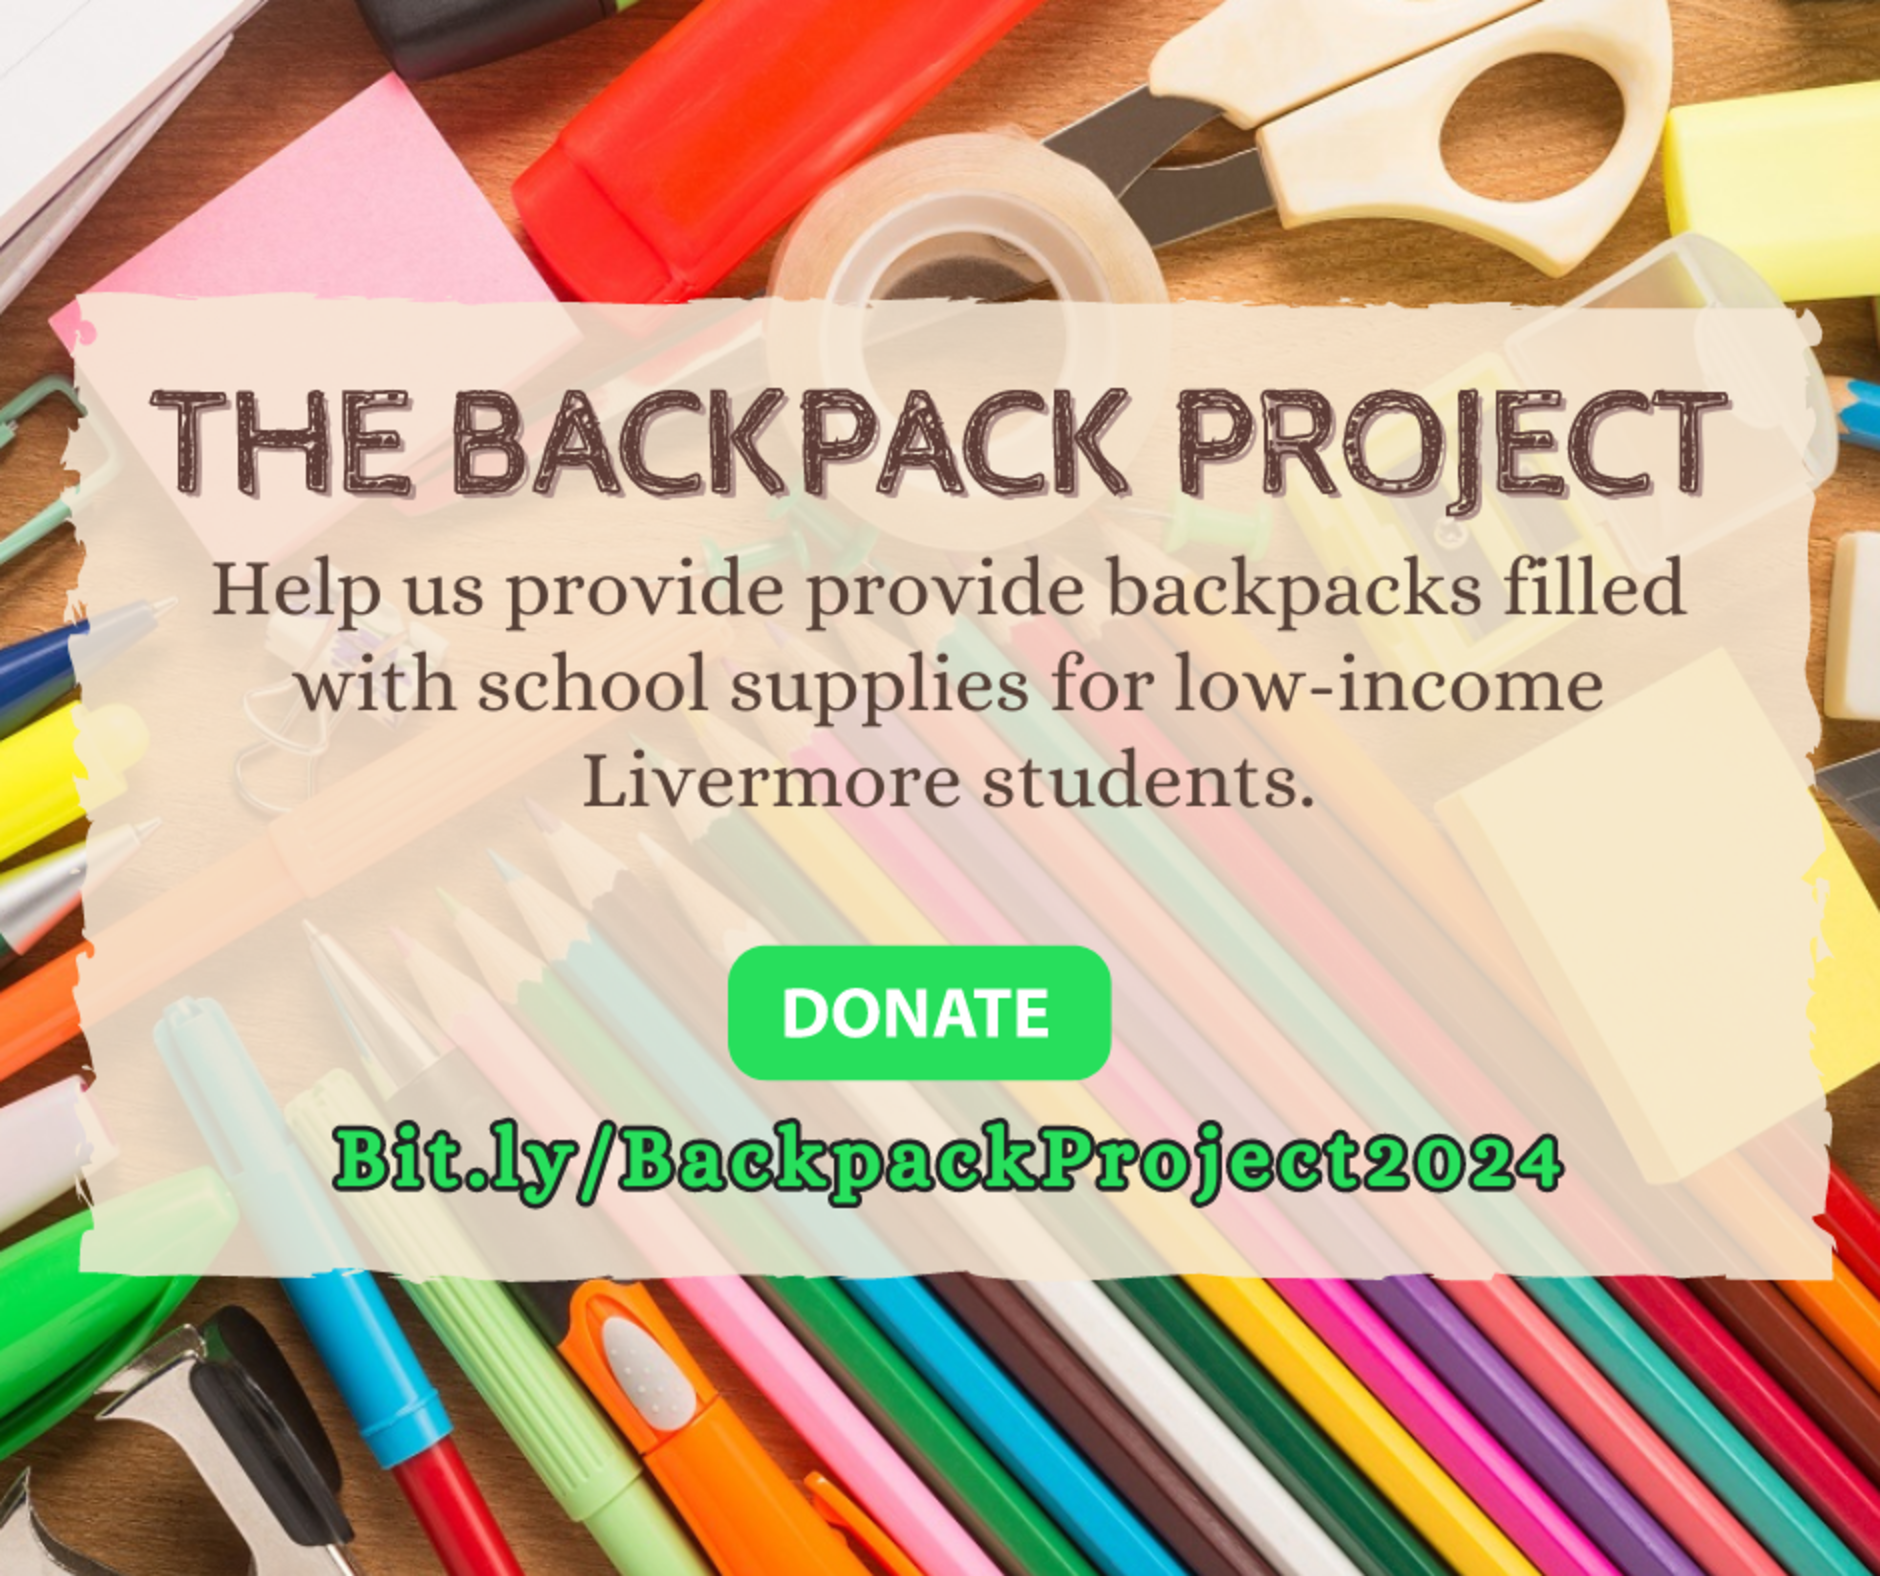 Backpack Project Appeal